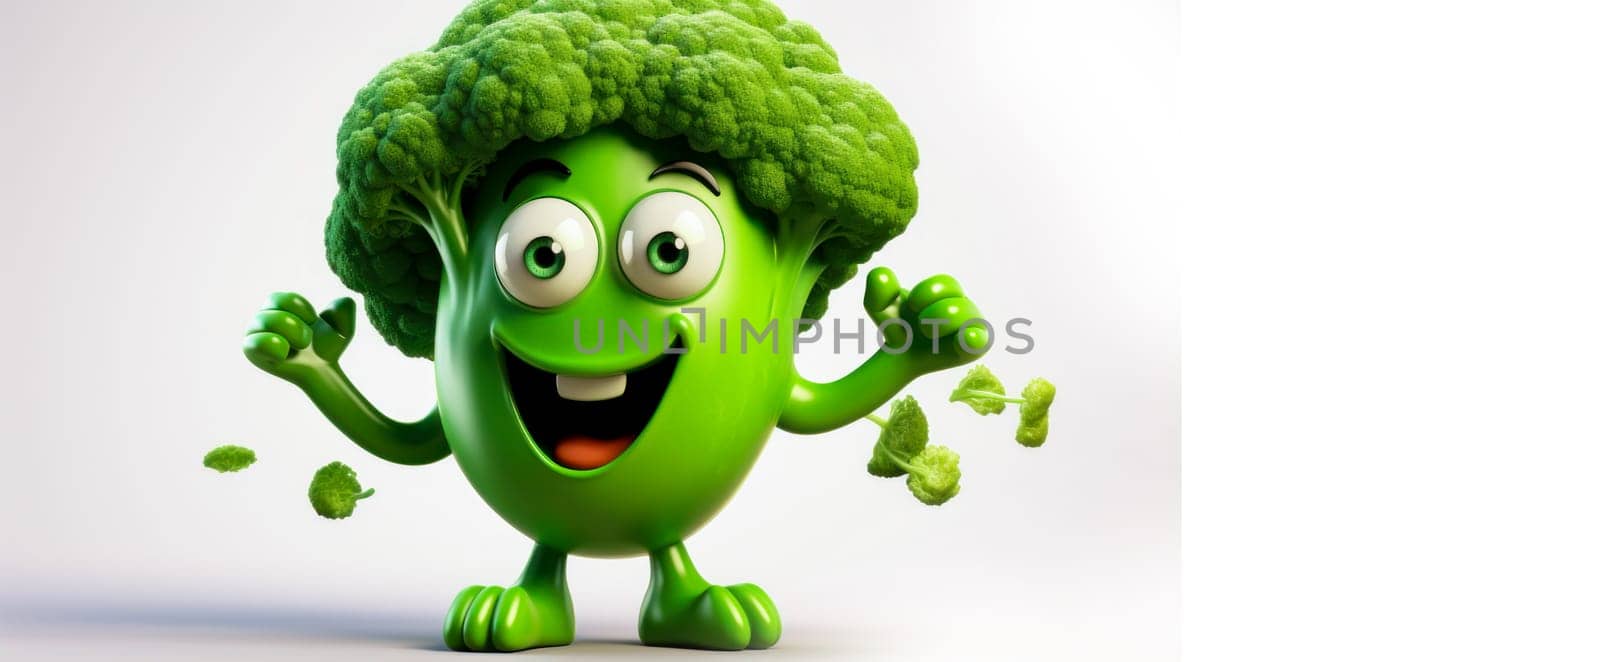 Green broccoli with a cheerful face 3D on a white background. Cartoon characters, three-dimensional character, healthy lifestyle, proper nutrition, diet, fresh vegetables and fruits, vegetarianism, veganism, food, breakfast, fun, laughter, banner